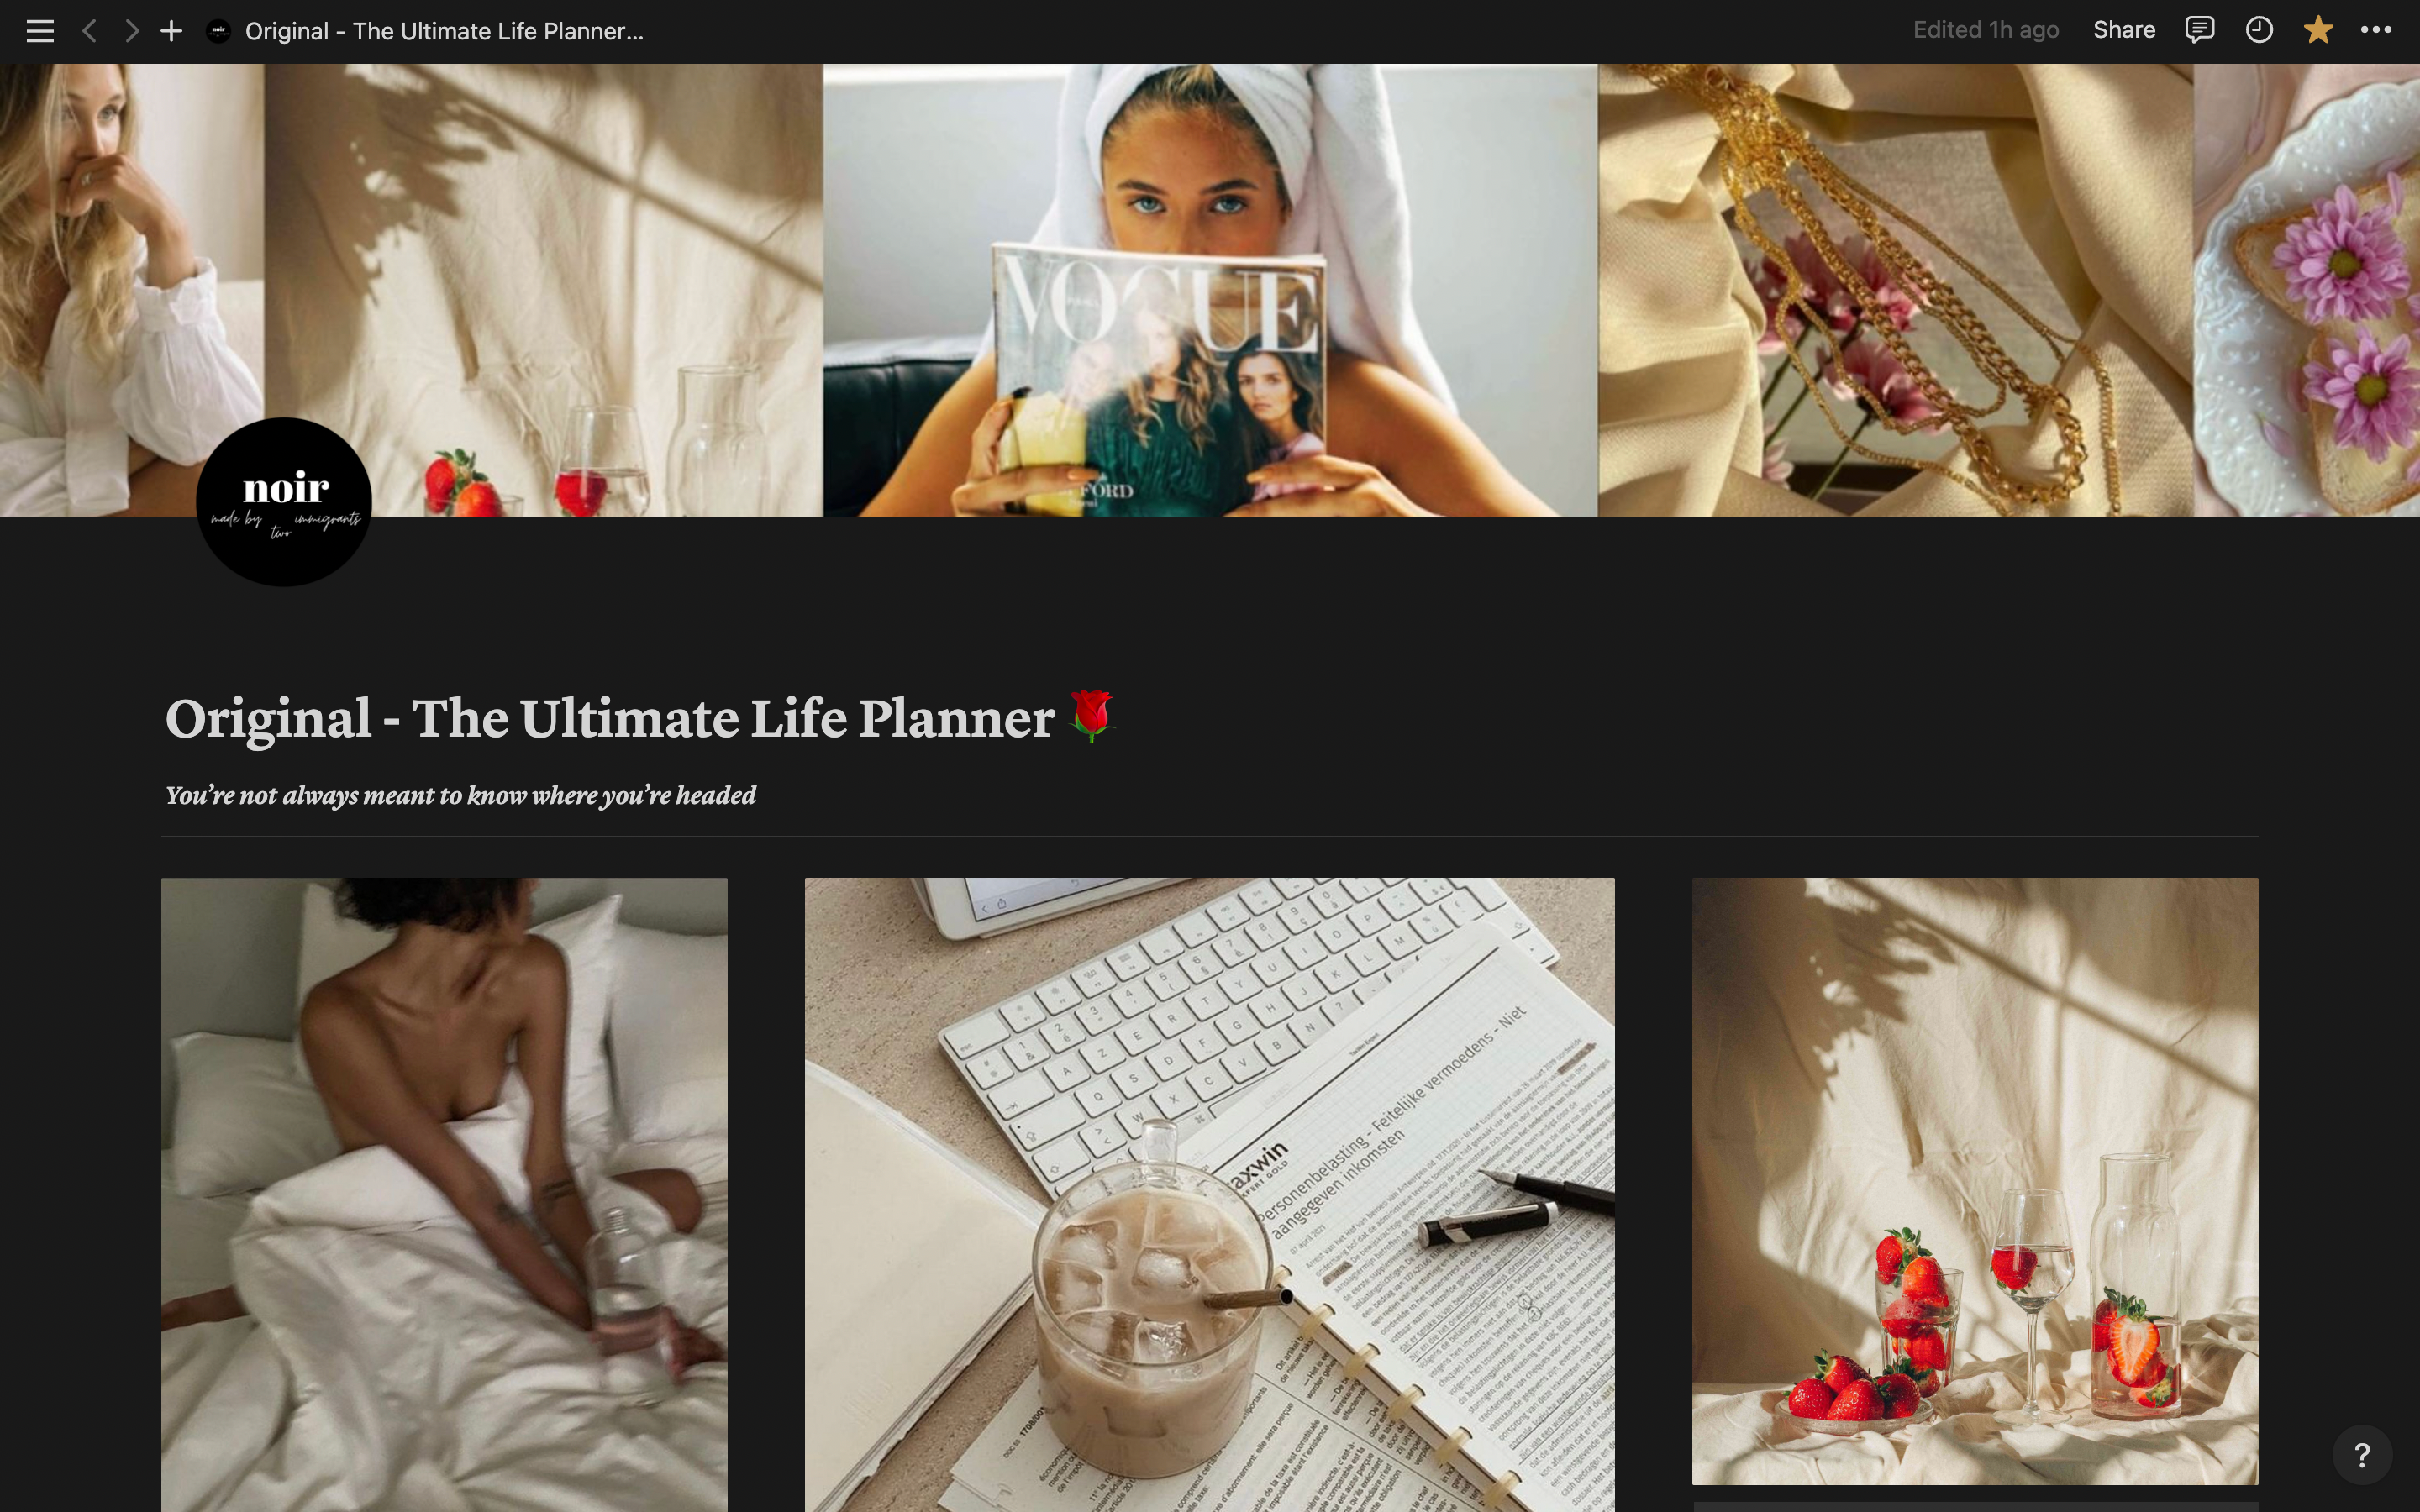 ultimate-life-planner